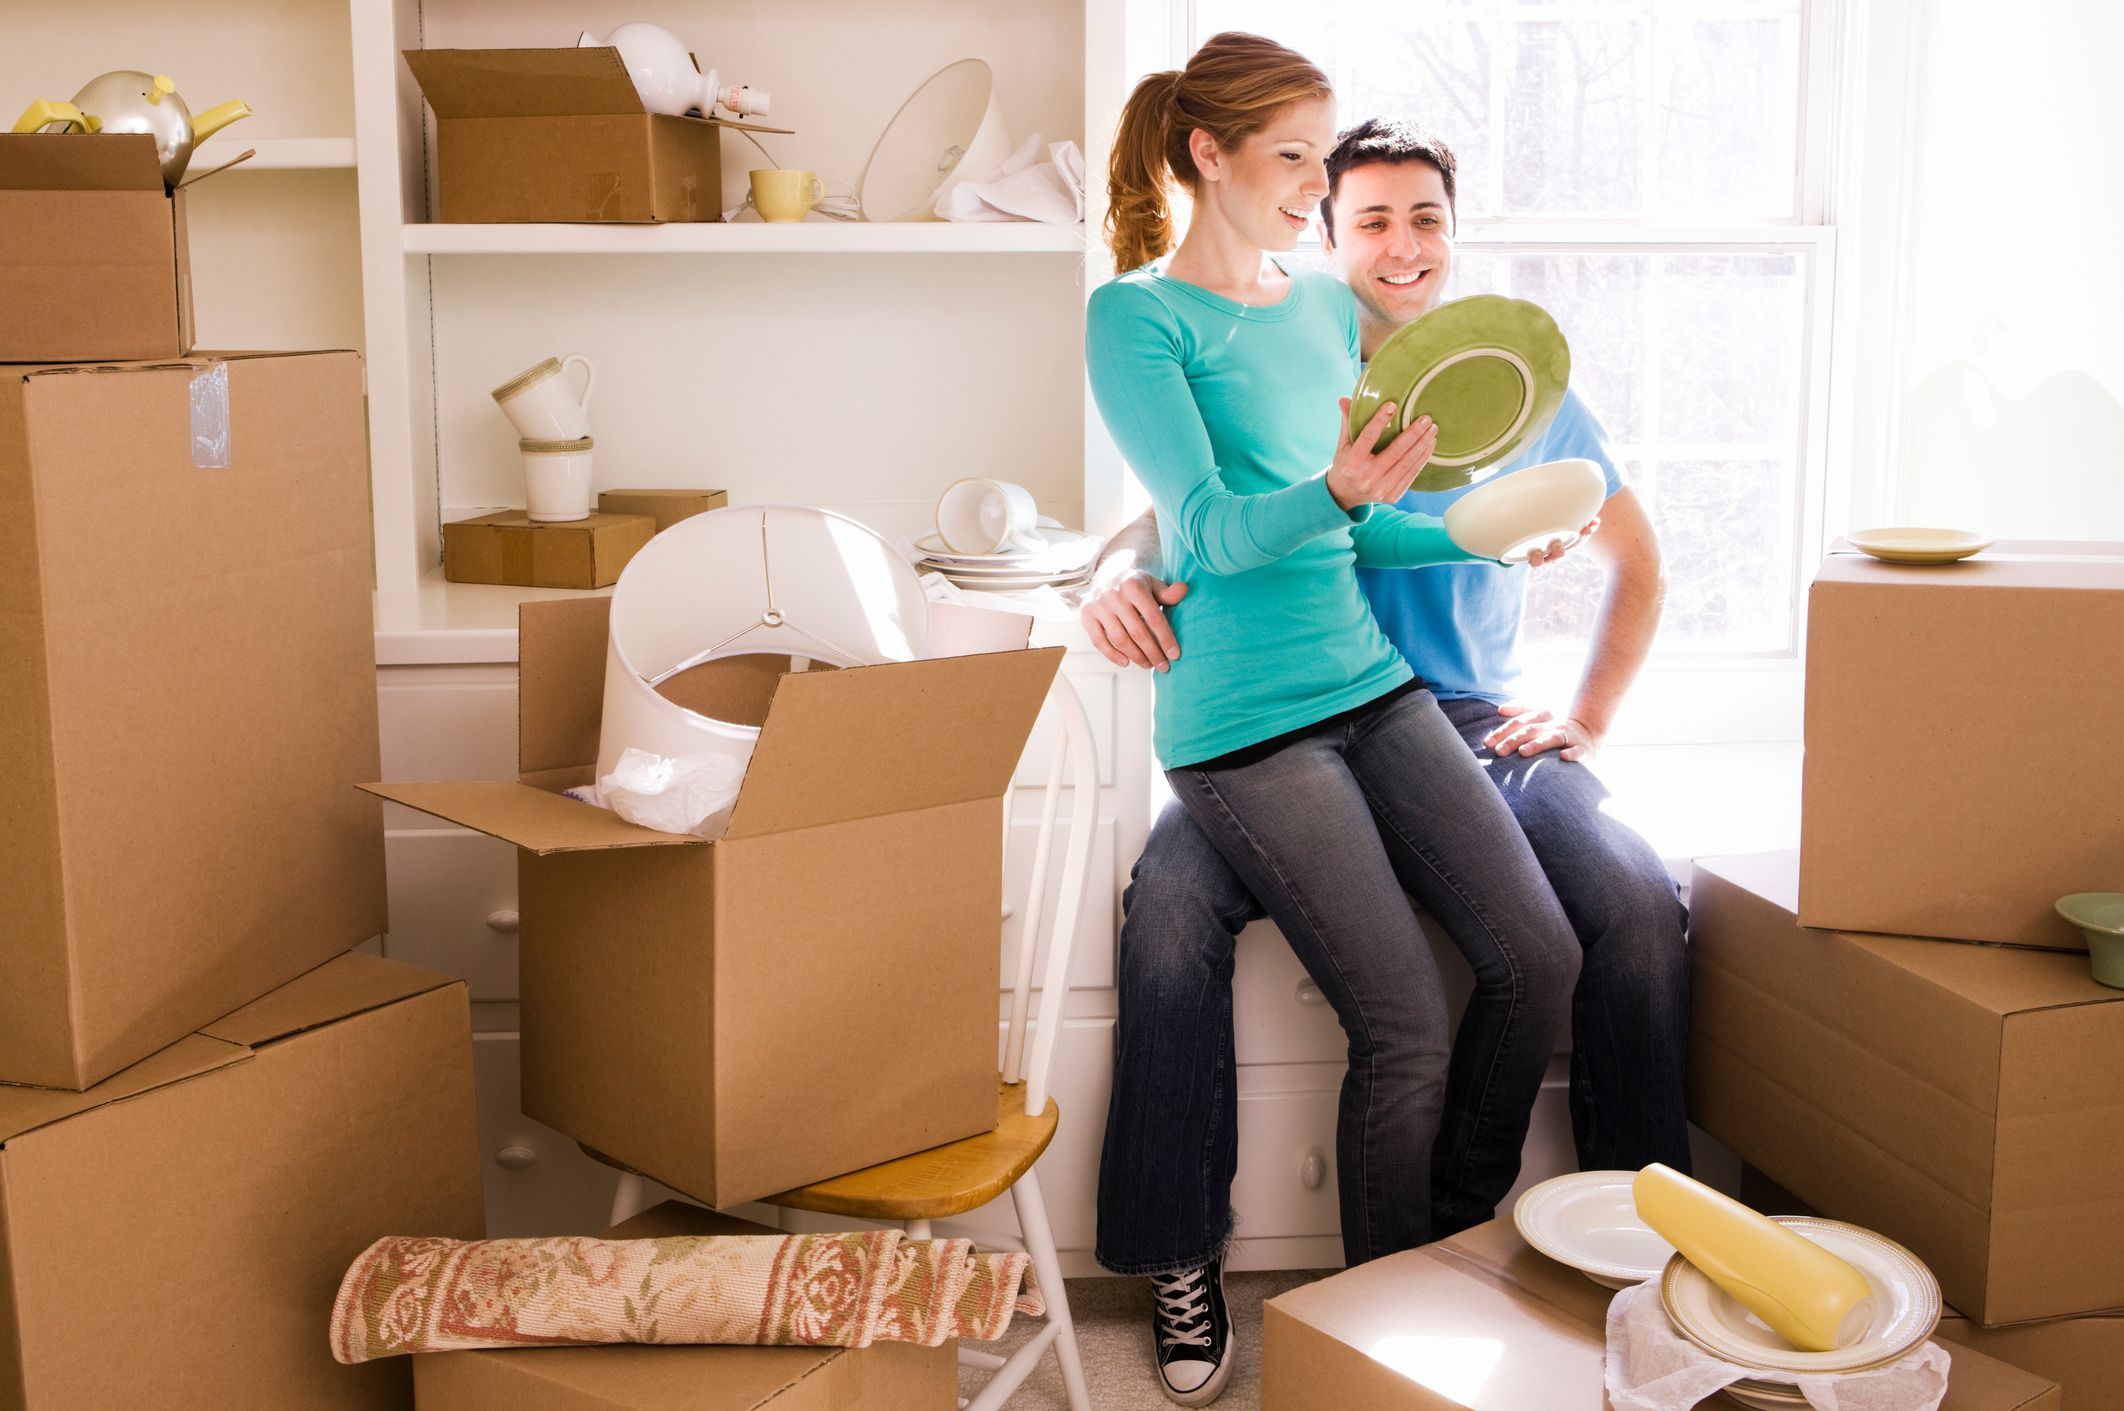 7 essential tools for when you've just moved into a new home